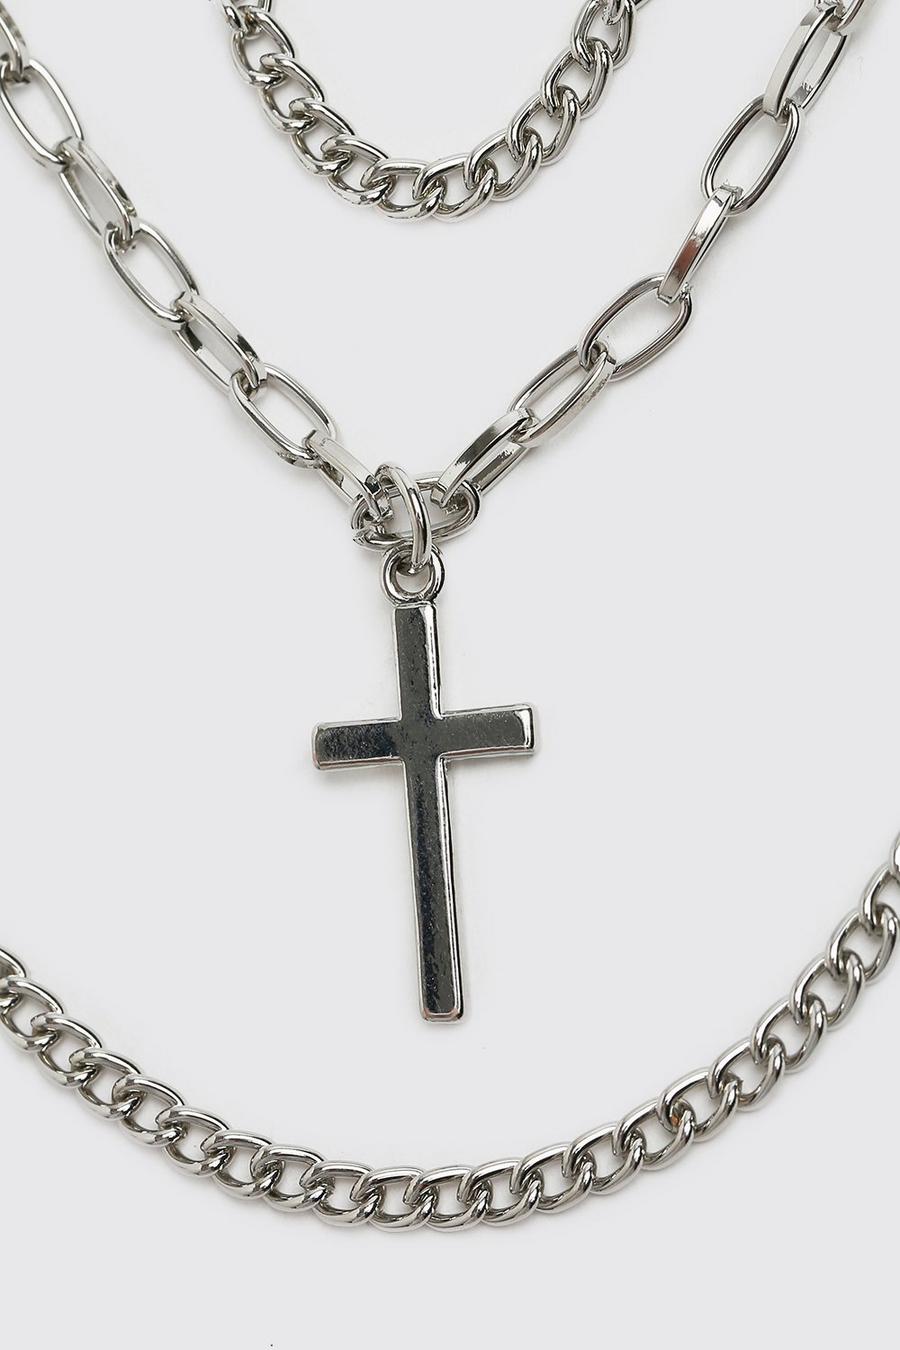 Silver Triple Layer Chain With Cross